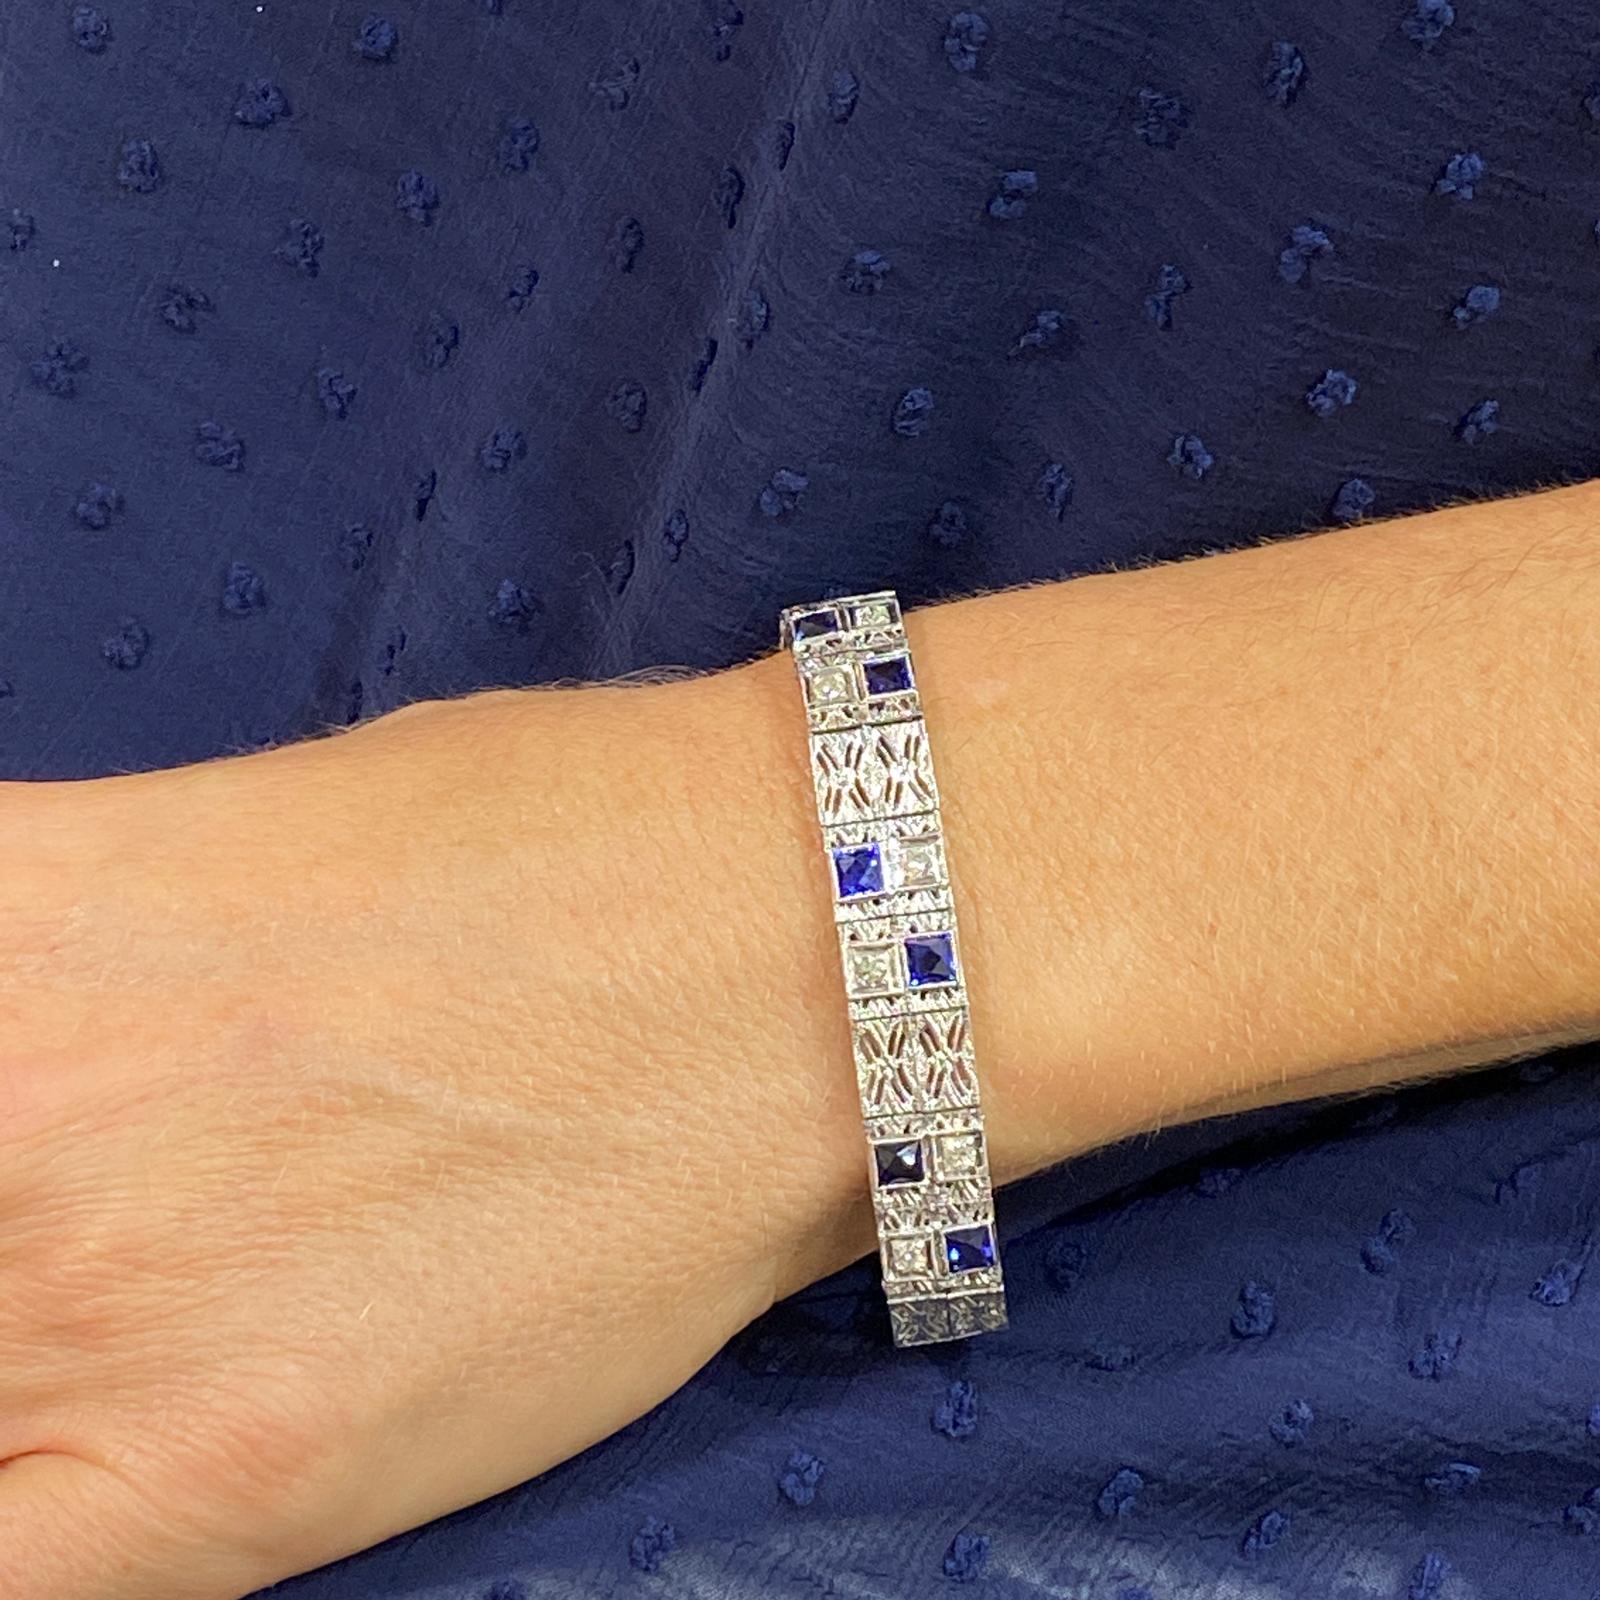  Art Deco Filigree Bracelet crafted in platinum and 18 karat white gold. The 6 Old European Cut Diamonds weigh approximately .90 carats and are graded G-H/VS. Six synthetic blue sapphires, used during that time period, add a nice contrast. The